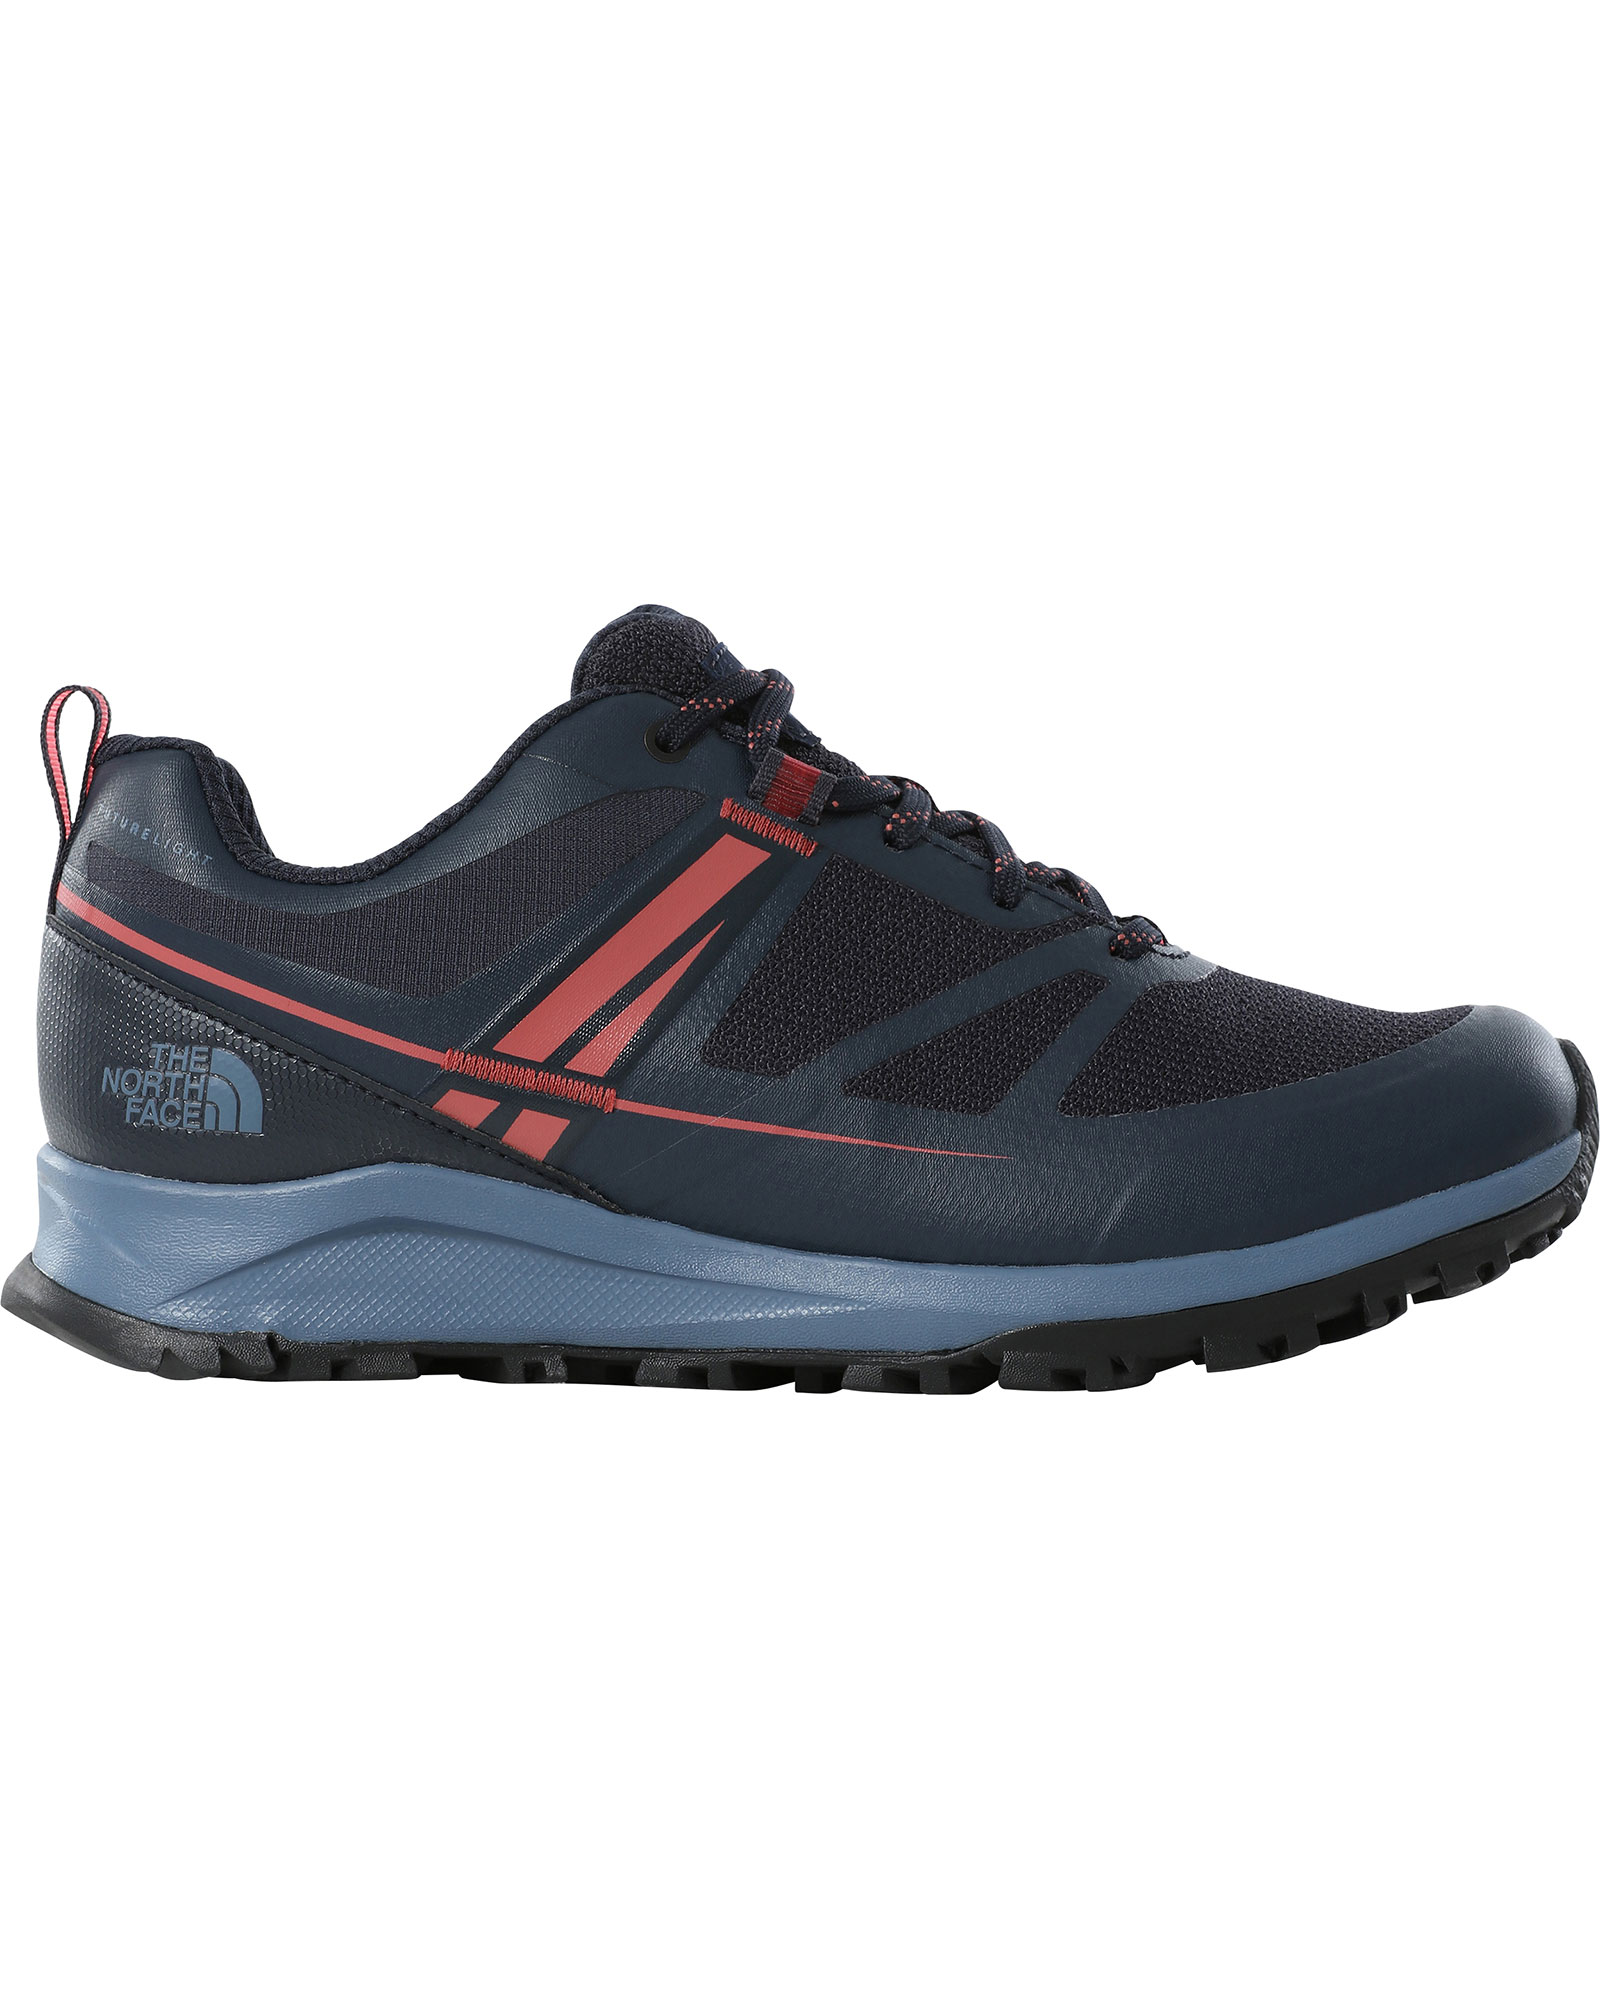 The North Face Litewave Futurelight Womens Shoes